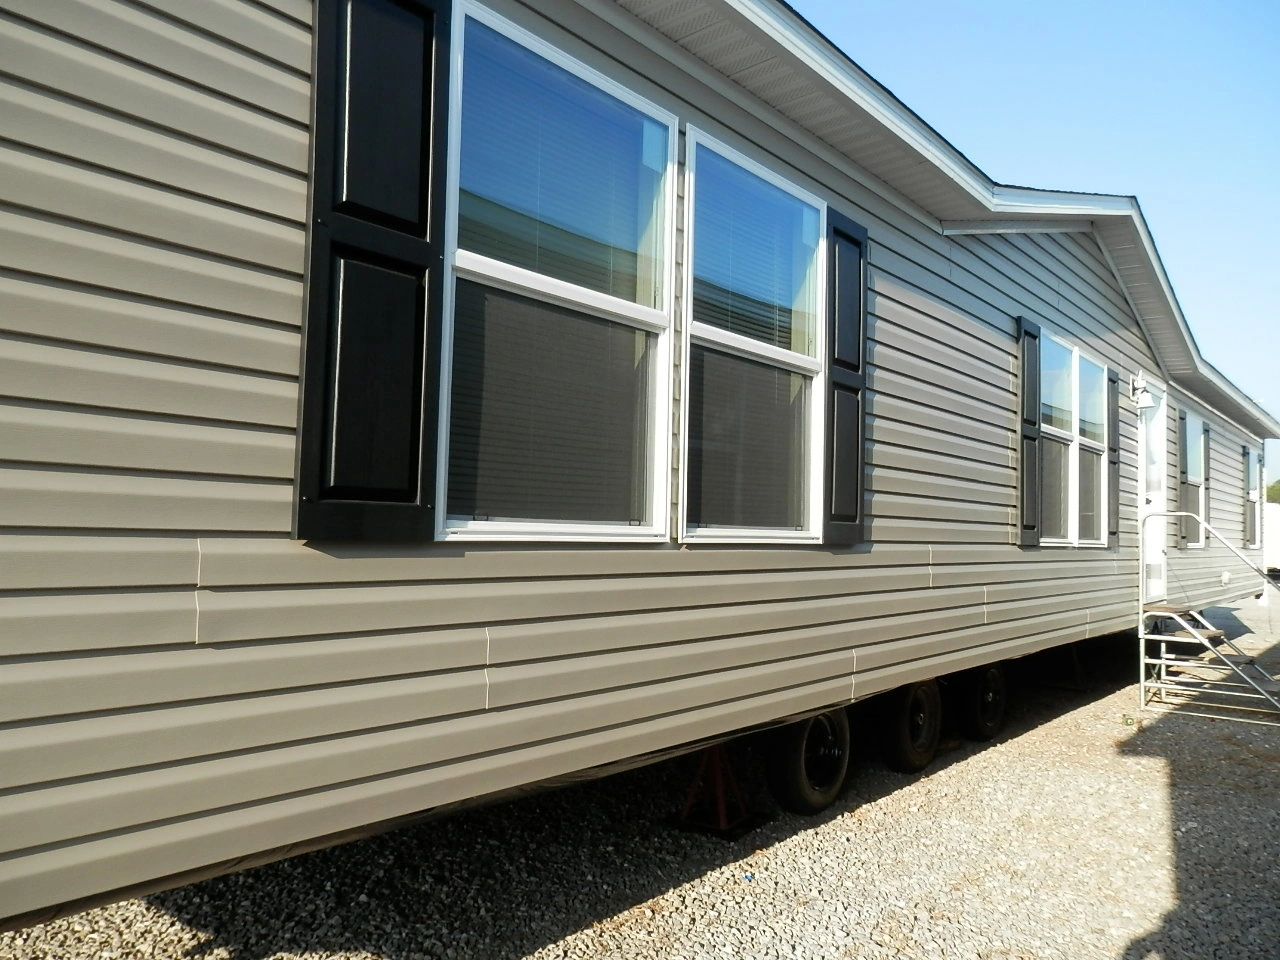 New manufactured home for sale in Alabama.